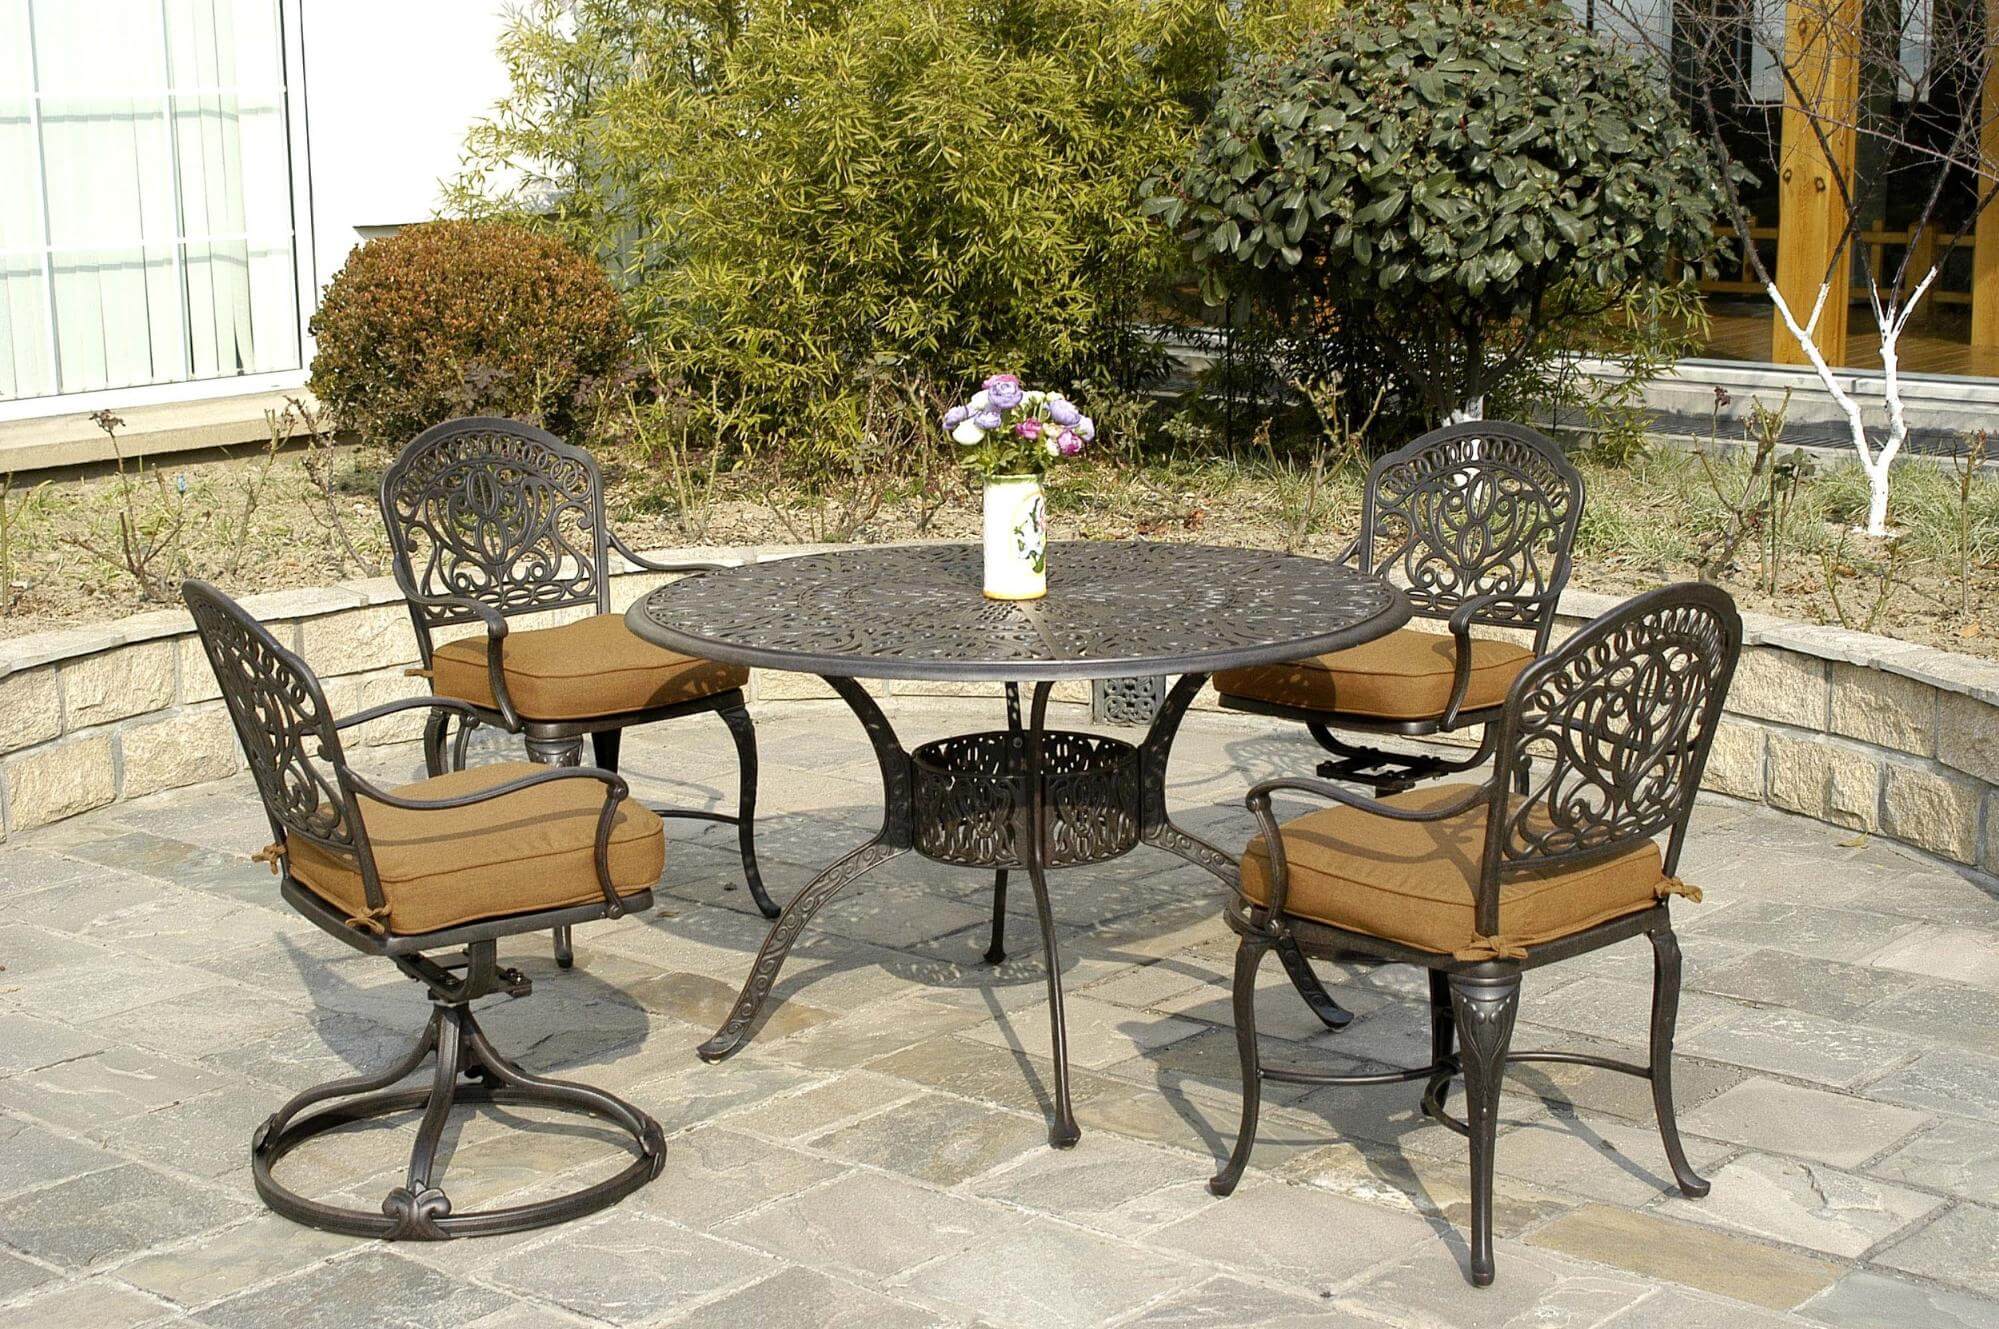 Patio Furniture For Small Spaces: 8 Simple Tips To Try